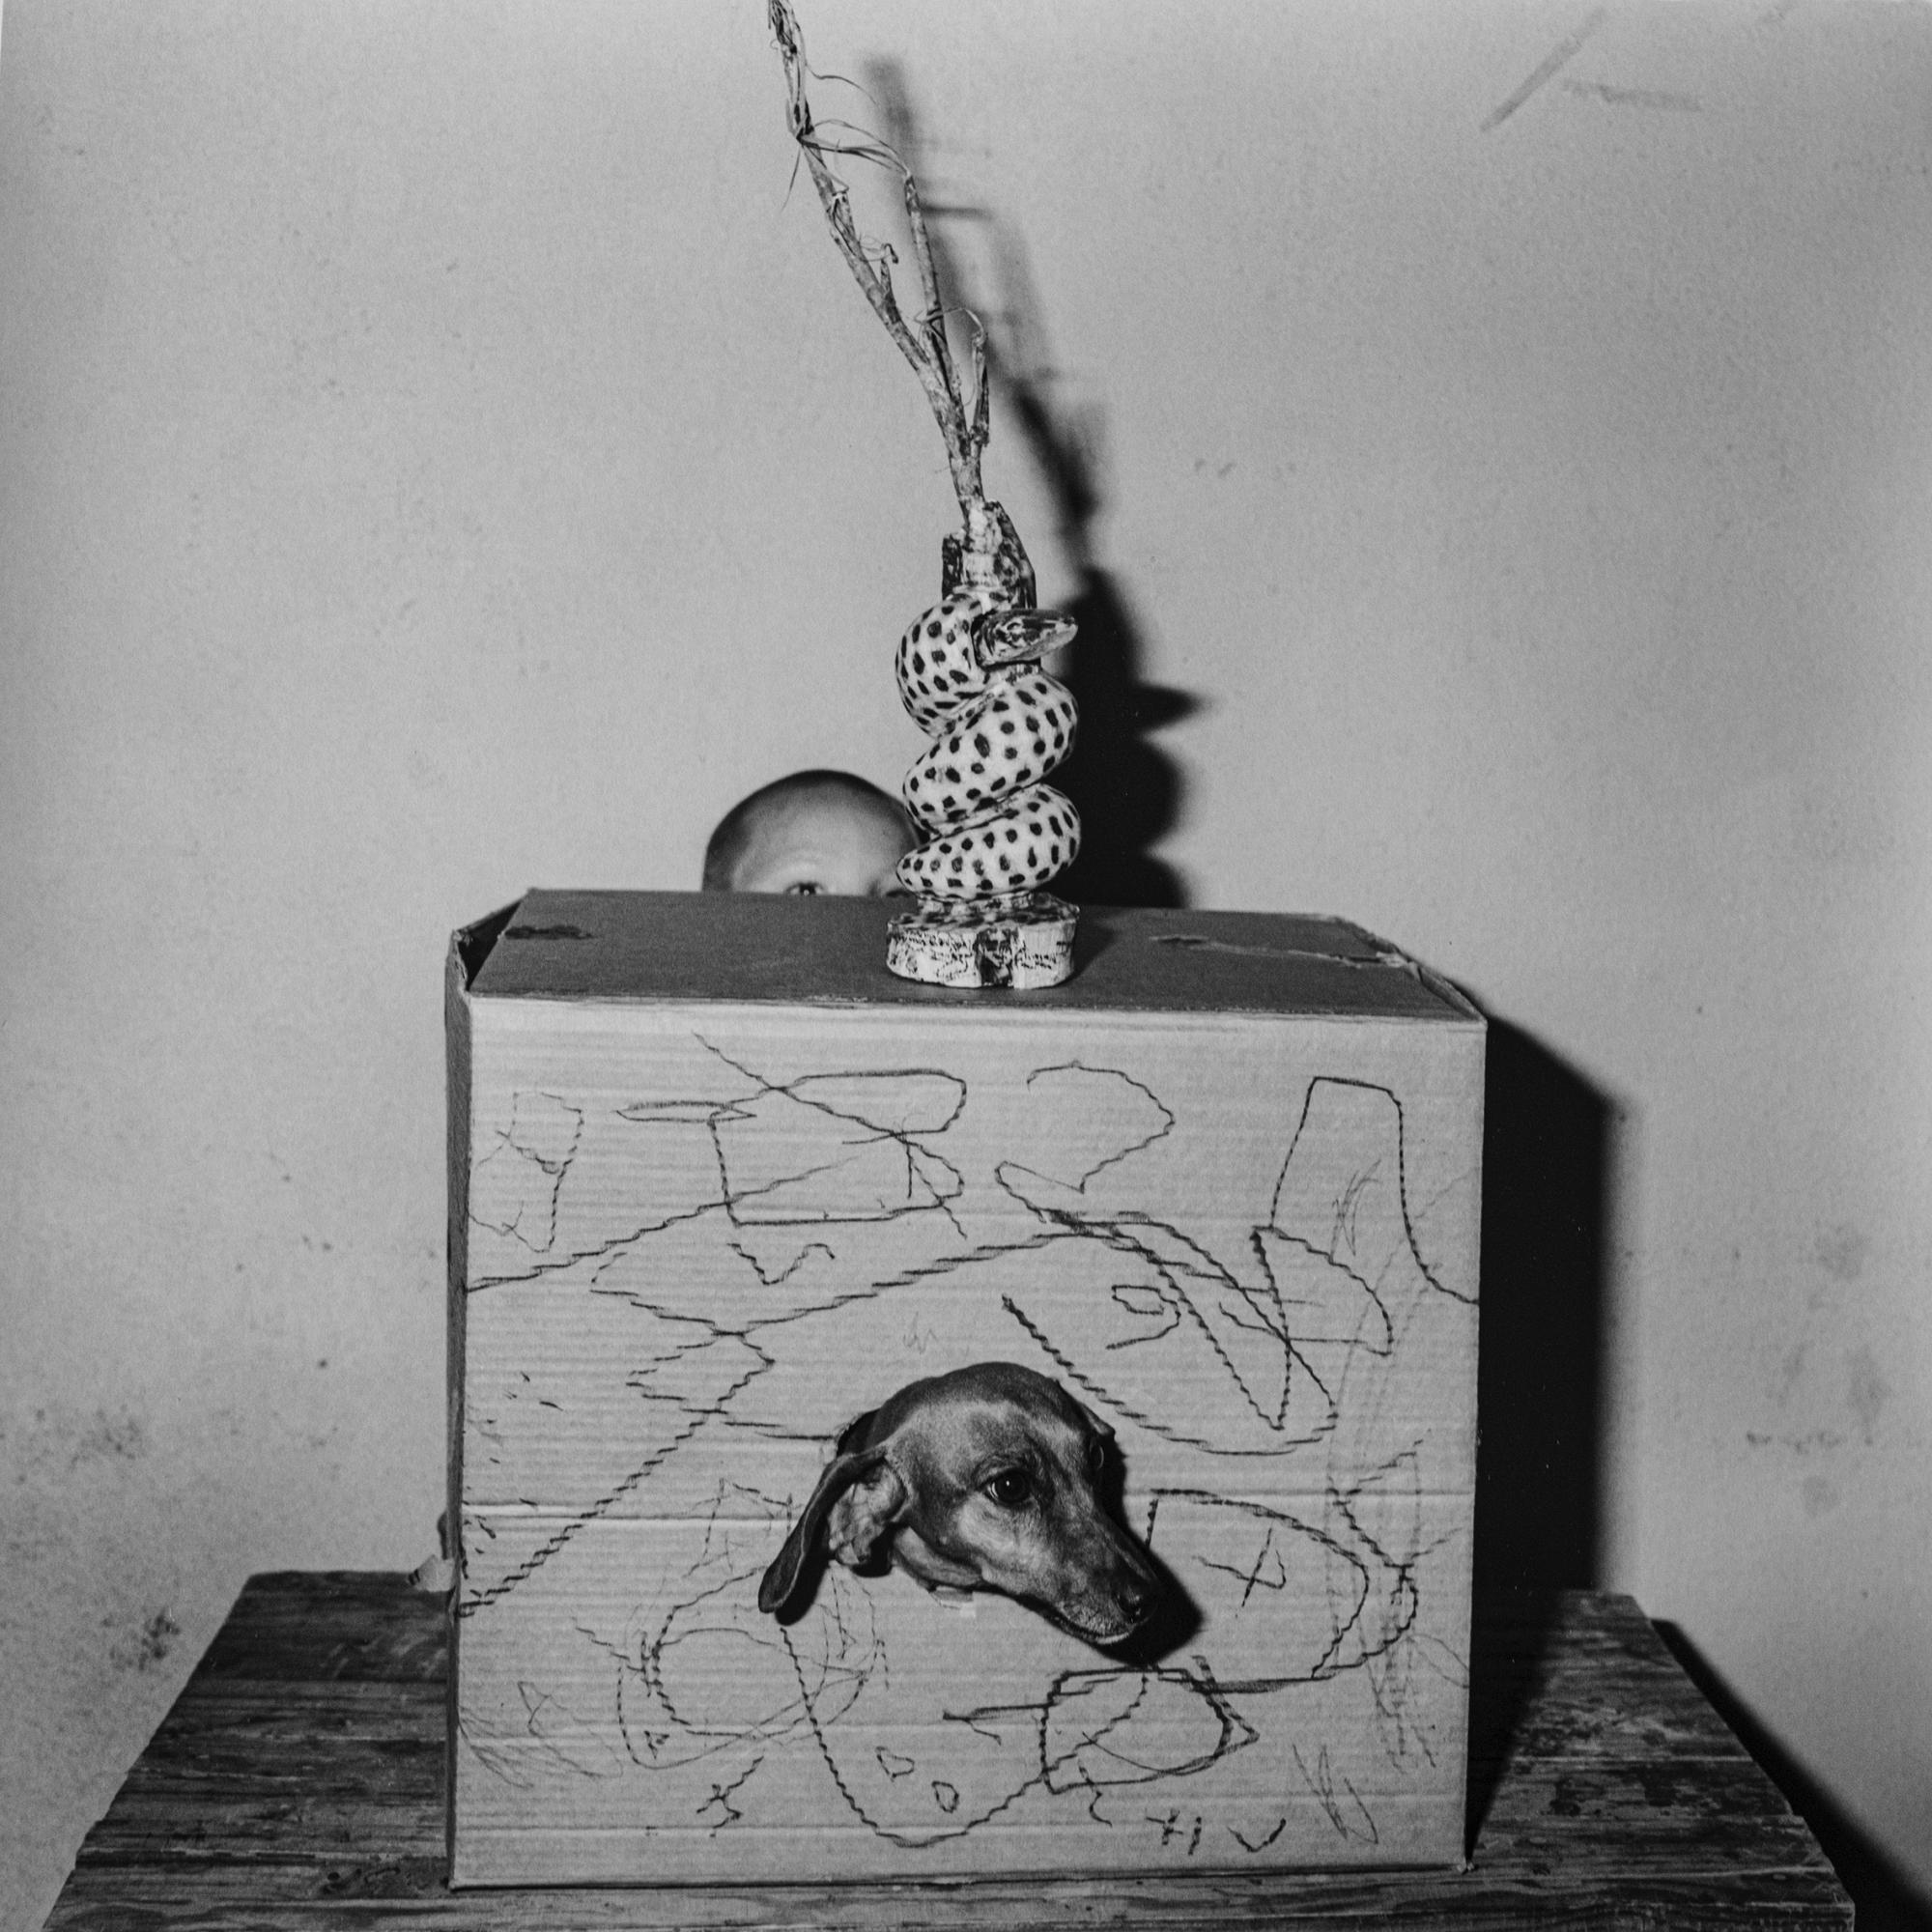 Hide and Seek – Roger Ballen, Black and White, Staged, Vintage Photography, Dog